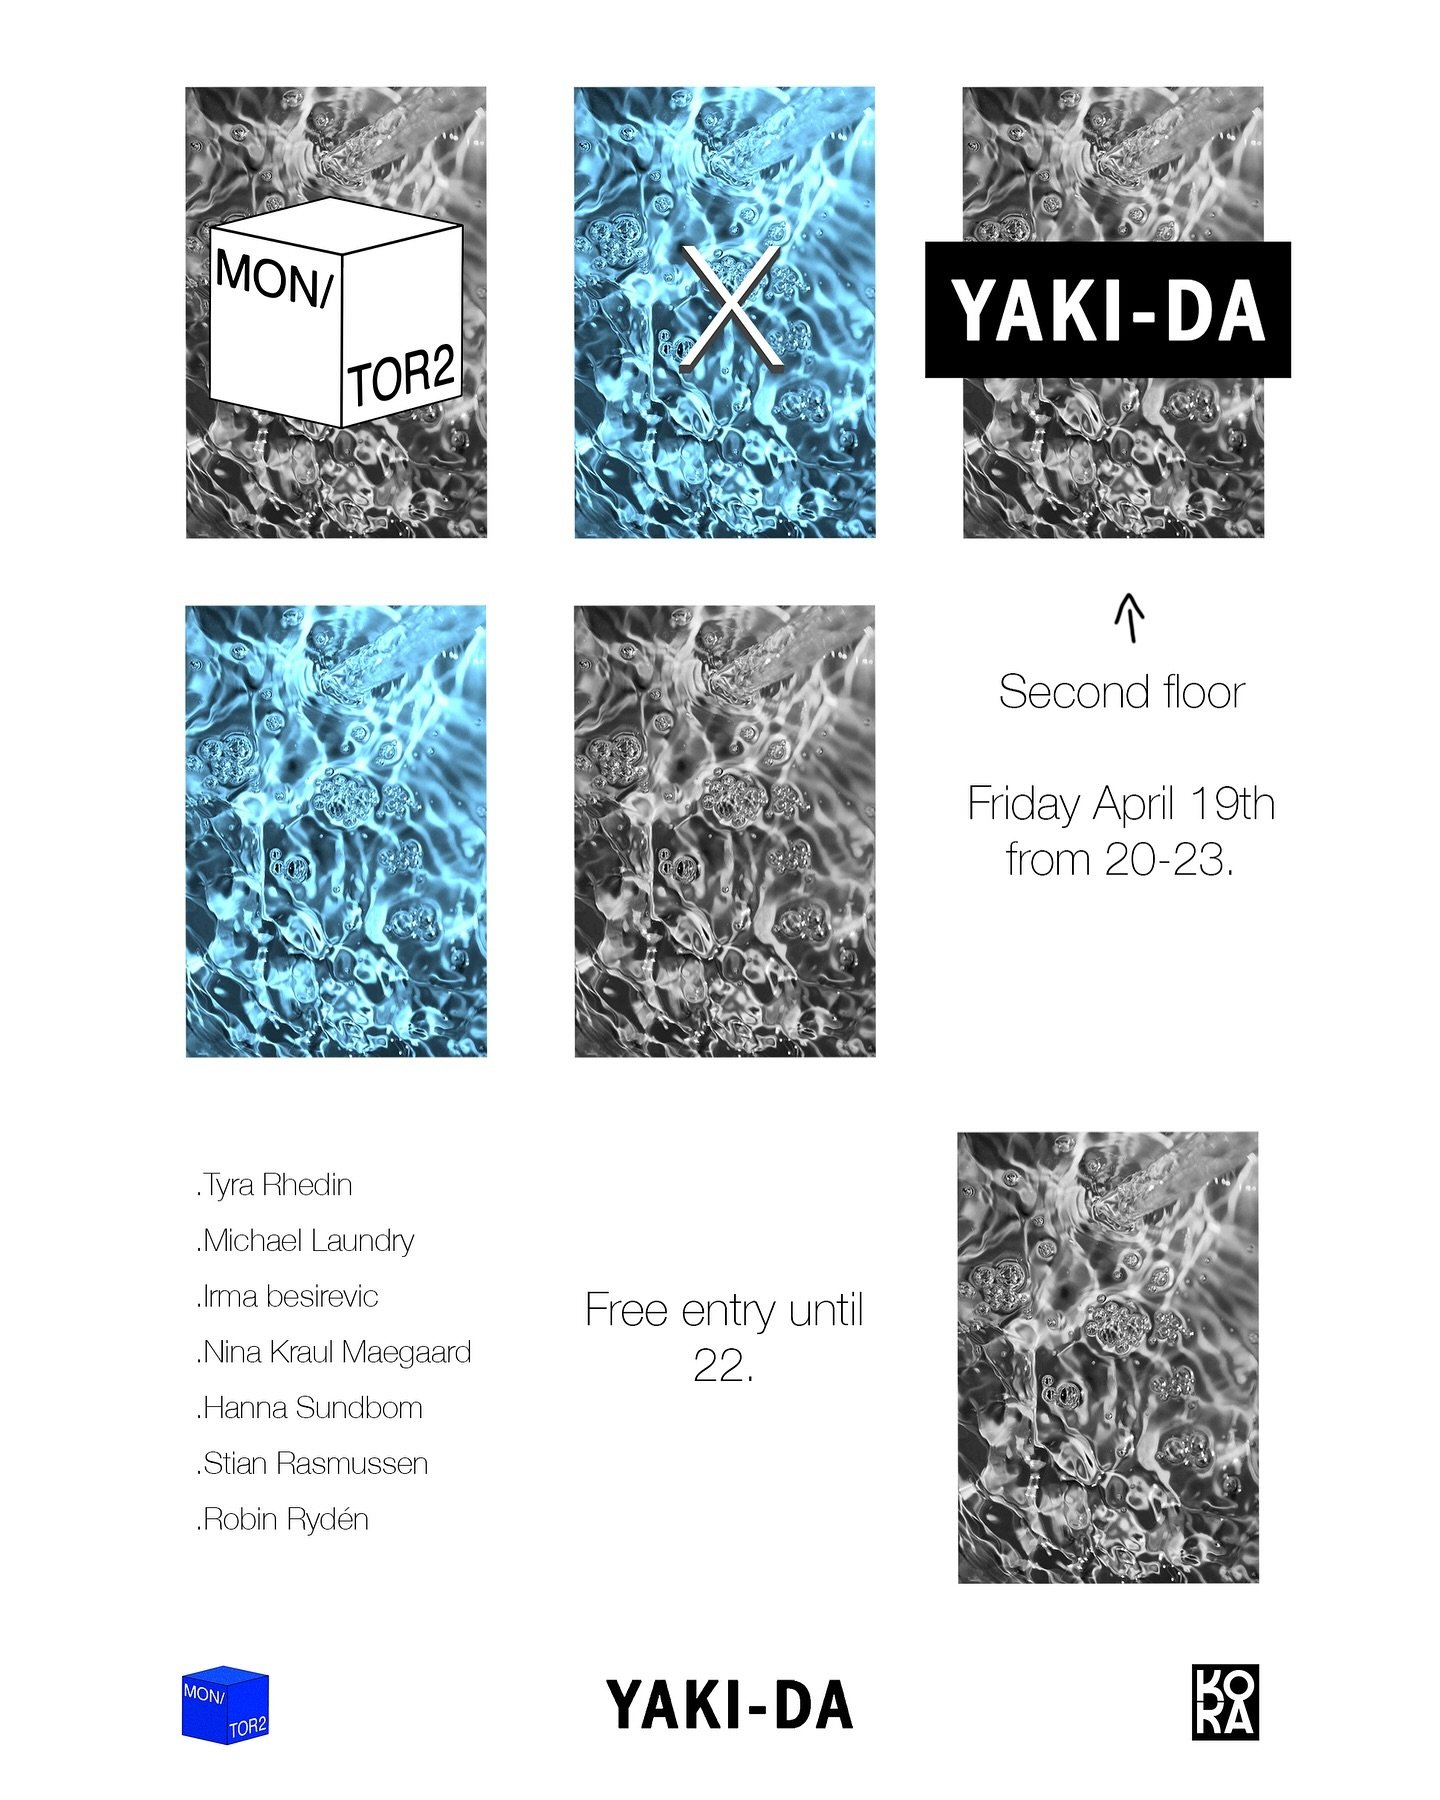 Drip, drip, drip.

The blue room in Yaki-Da is becoming  WET LIQUID FLUID  on Friday, April 19th, and we are asking you to flow with the stream, as it might lead you to the OCEAN.

Come join us for the Gallery group x YAKI-DA EXHIBITION !!!
Bring you